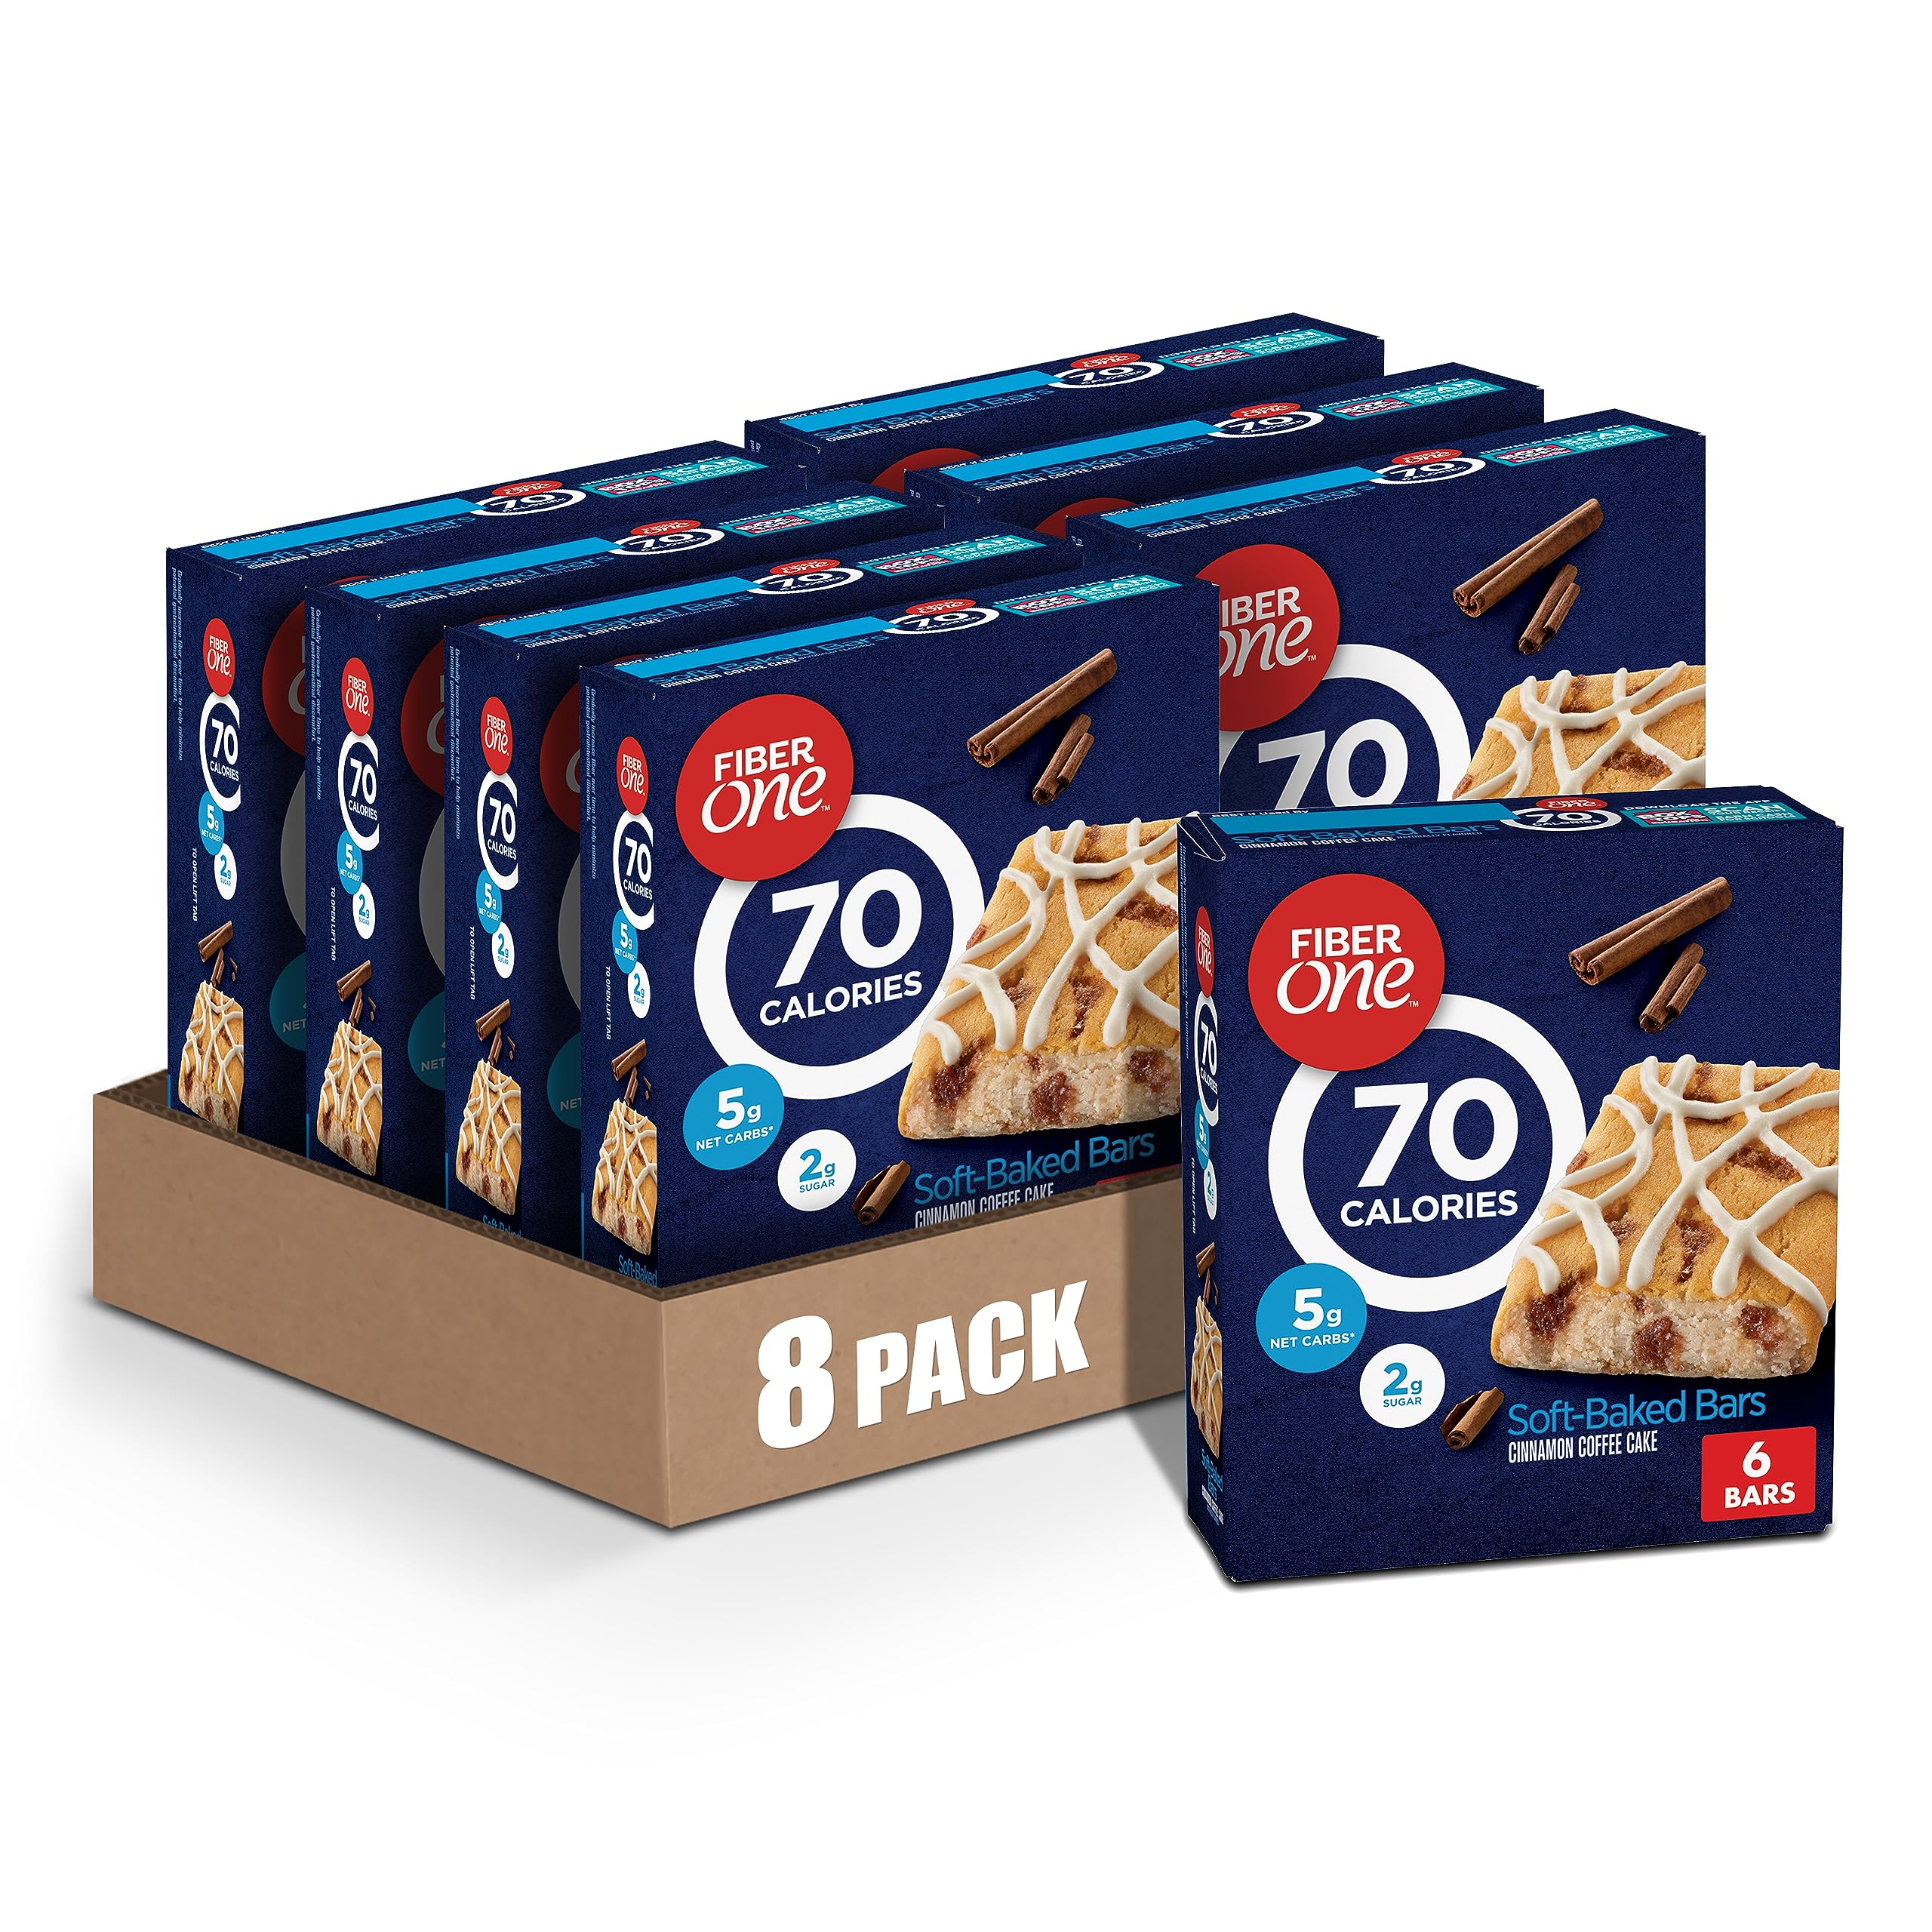 8-Count of 6-Pack 5.34-Oz Fiber One 70 Calorie Soft-Baked Bars (Cinnamon Coffee Cake) $11.94 ($1.49 each box, 48 bars total, $0.25 per bar) w/ S&S + FS w/ Prime or on $35+